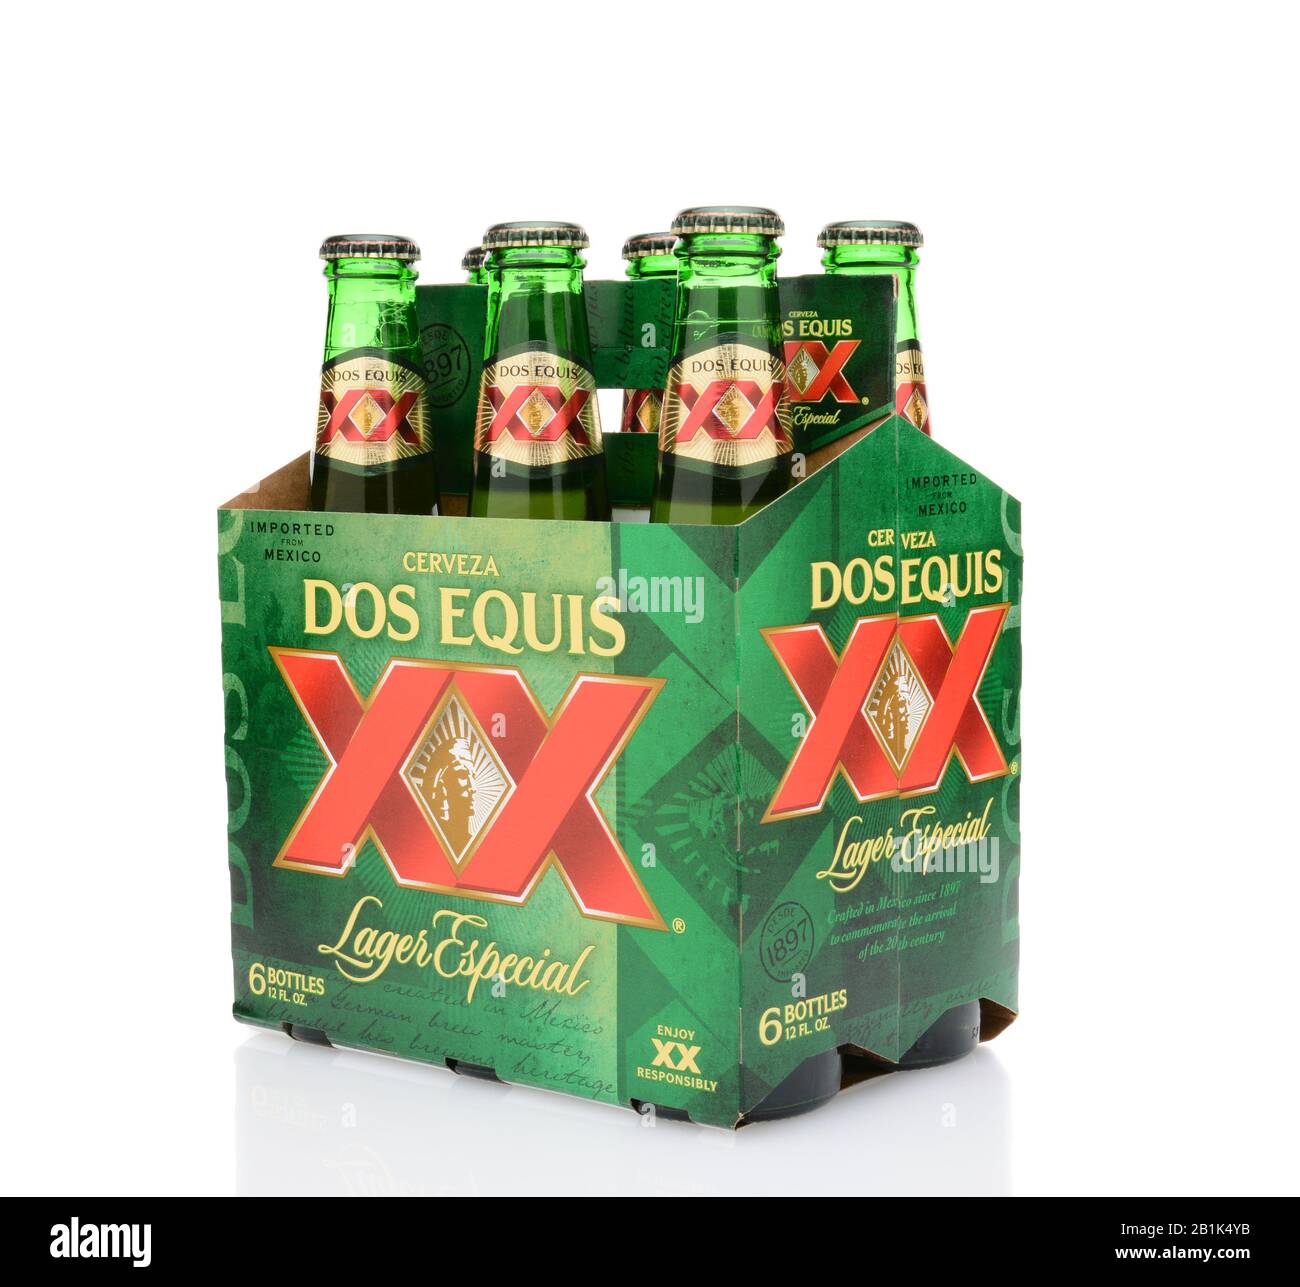 IRVINE, CA - MAY 25, 2014: A three quarters view of a 6 pack of Dos Equis Lager Especial. Founded in 1890 from the Cuauhtemoc-Moctezuma Brewery in Mon Stock Photo